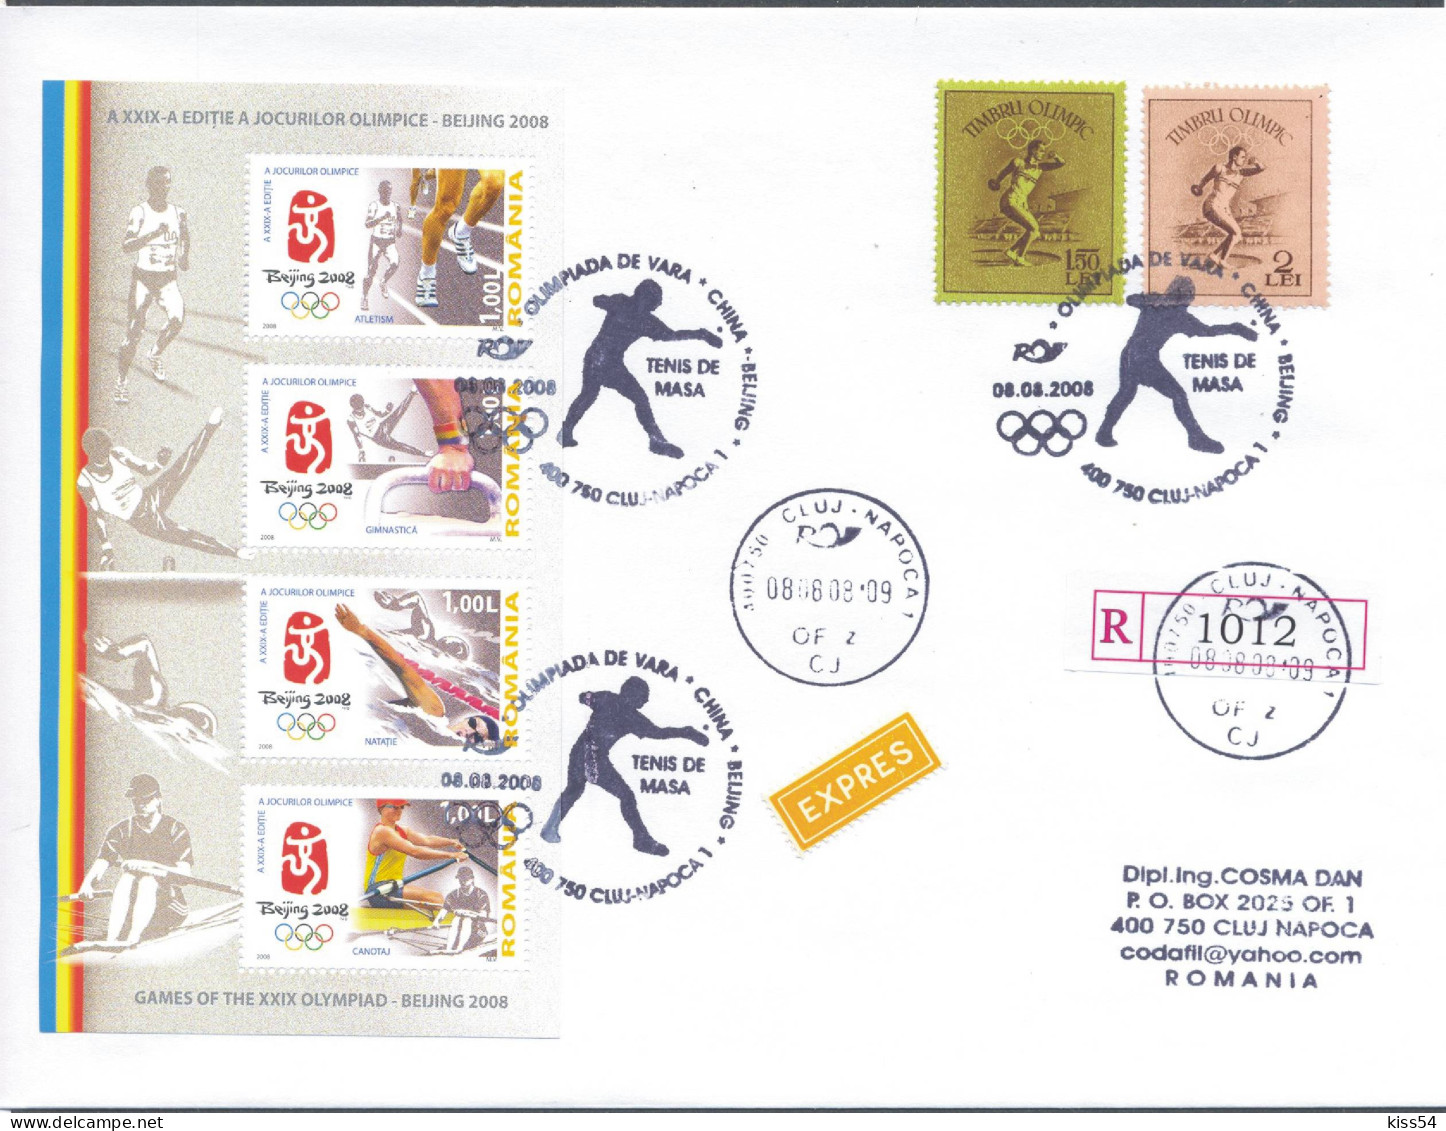 CV 89 - 469 TABLE TENNIS, Olimpic Games Beijing, China-Romania - Cover - Used - 2008 - Tennis De Table